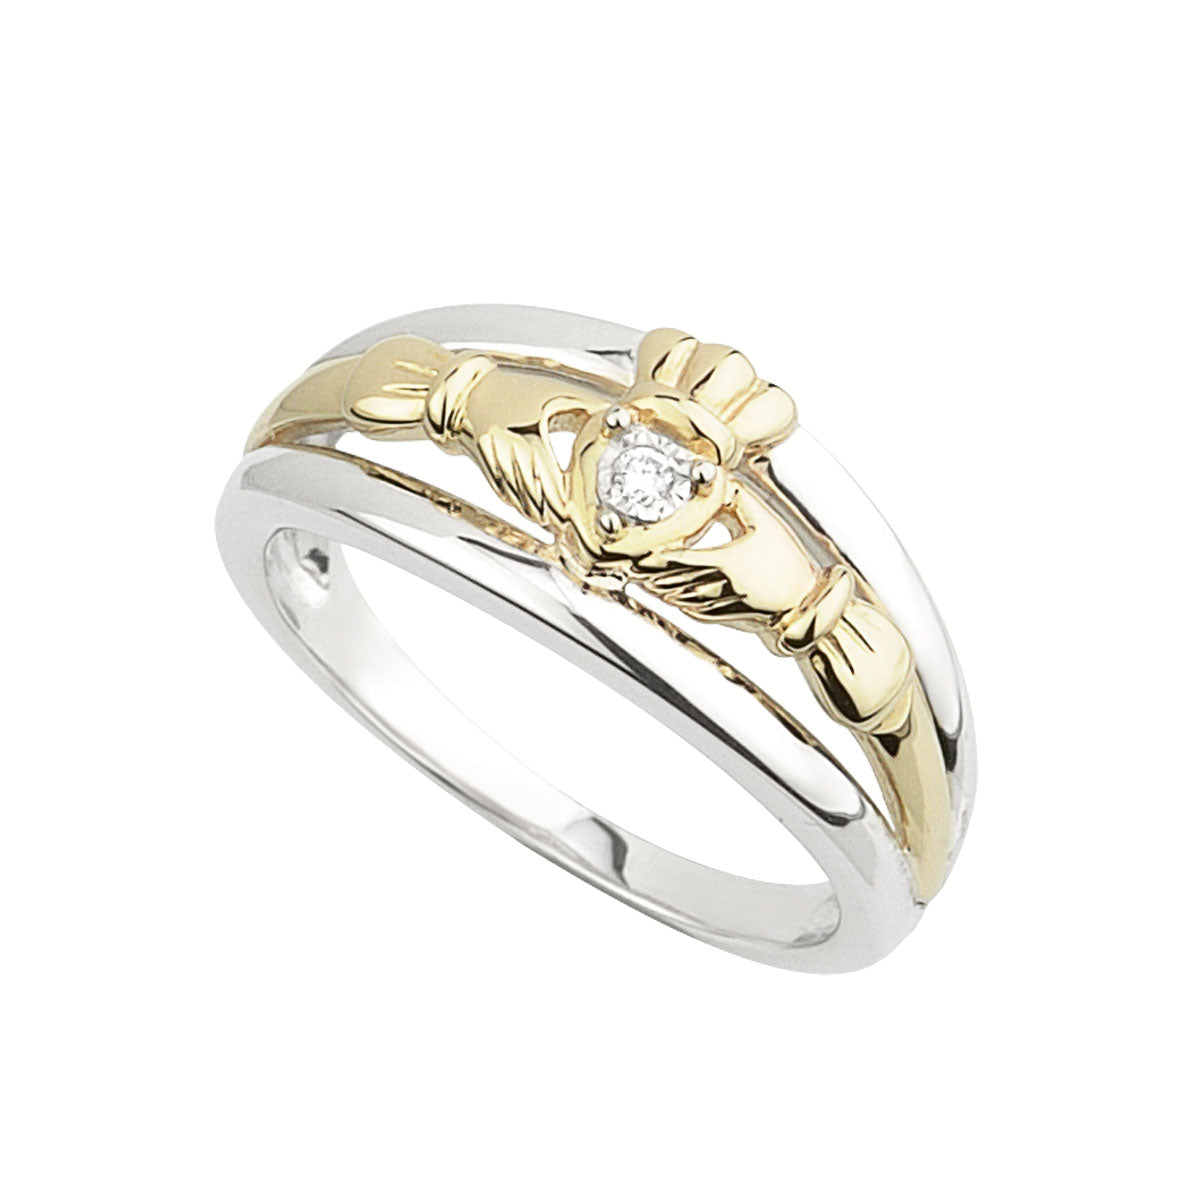 sterling silver and 10k gold gold diamond claddagh ring s2903 from Solvar